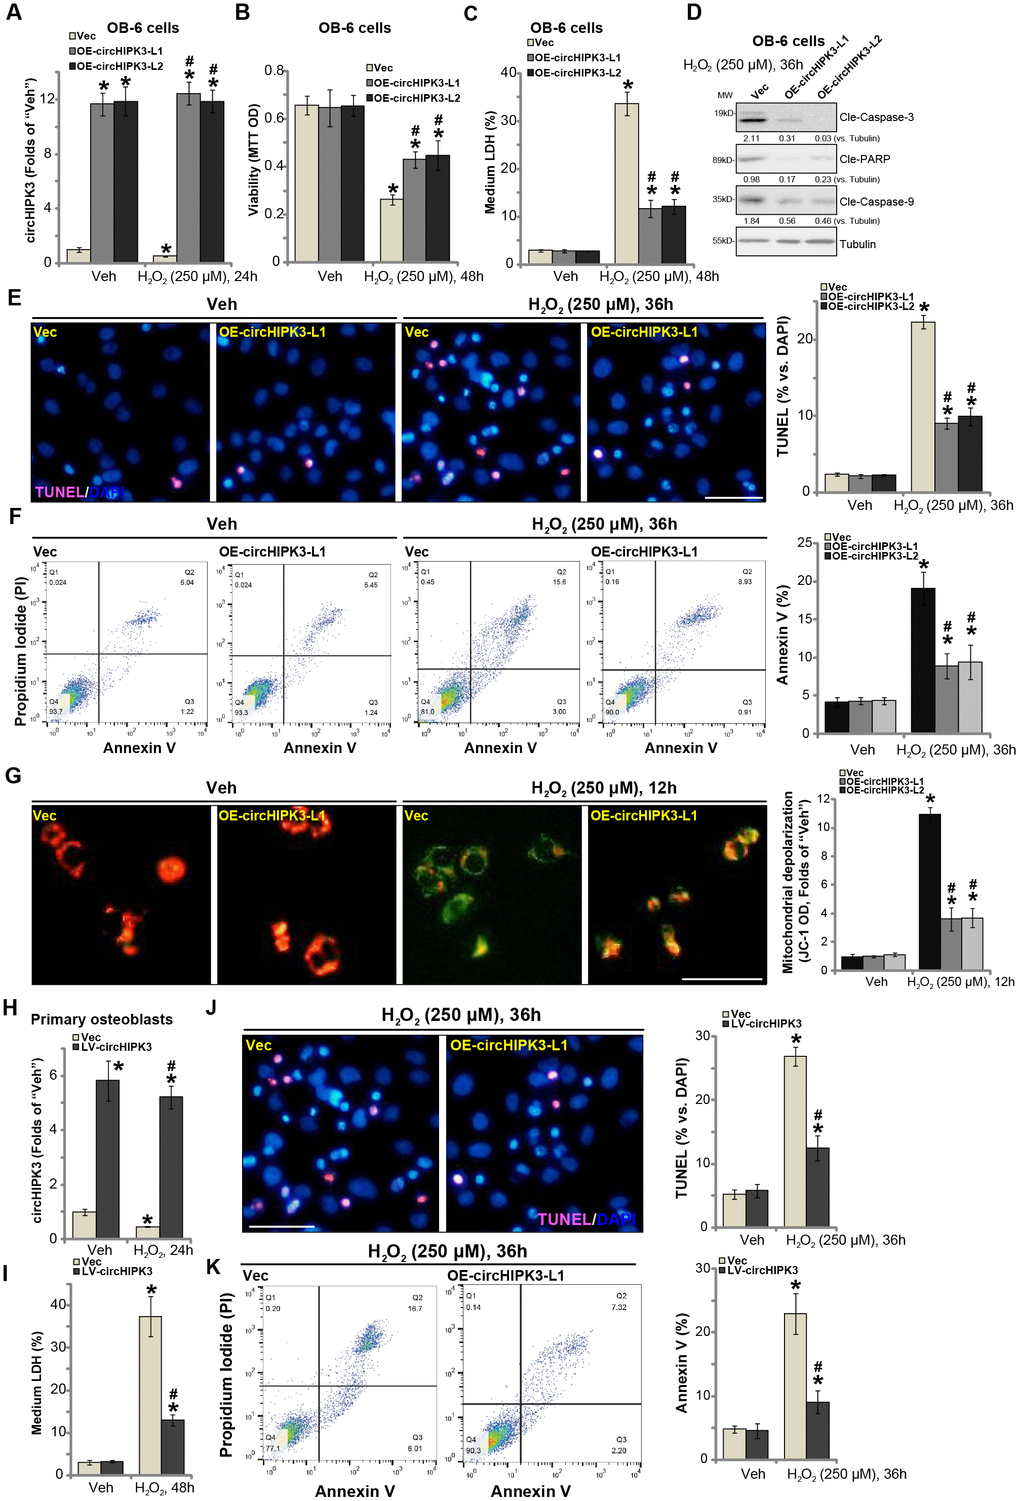 Forced overexpression of circHIPK3 alleviates H2O2-induced death and apoptosis in human osteoblasts. OB-6 human osteoblastic cells were infected with circHIPK3-expressing lentivirus (“LV-circHIPK3”) or control lentivirus (with empty vector, “Vec”), following puromycin selection stable cell lines were established (“OE-circHIPK3-L1/2”). Cells were treated with hydrogen peroxide (H2O2, 250 μM) and cultured for the applied time periods, relative circHIPK3 expression was tested by qPCR assay (A); Cell viability (B), cell death (C), cell apoptosis (D–F) and mitochondrial depolarization (G) were tested by the assays mentioned in the text, and results were quantified. The primary human osteoblasts were infected with “LV-circHIPK3” or “Vec” for 24h, then treated with hydrogen peroxide (H2O2, 250 μM) and cultured for the applied time periods, relative circHIPK3 expression and cell death were tested by qPCR (H) and LDH release (I) assays, respectively; Cell apoptosis was tested by TUNEL staining (J) and Annexin V-FACS (K) assays. Expression of the listed proteins was quantified and normalized to the loading control protein (β-) Tubulin (D). “MW” stands for molecular weight (Same for all Figures). Quantified values were mean ± standard deviation (SD, n=5). * P #P 2O2 treatment of “Vec” cells. Experiments were repeated five times, with similar results obtained. Bar=100 μm (E, G and J).